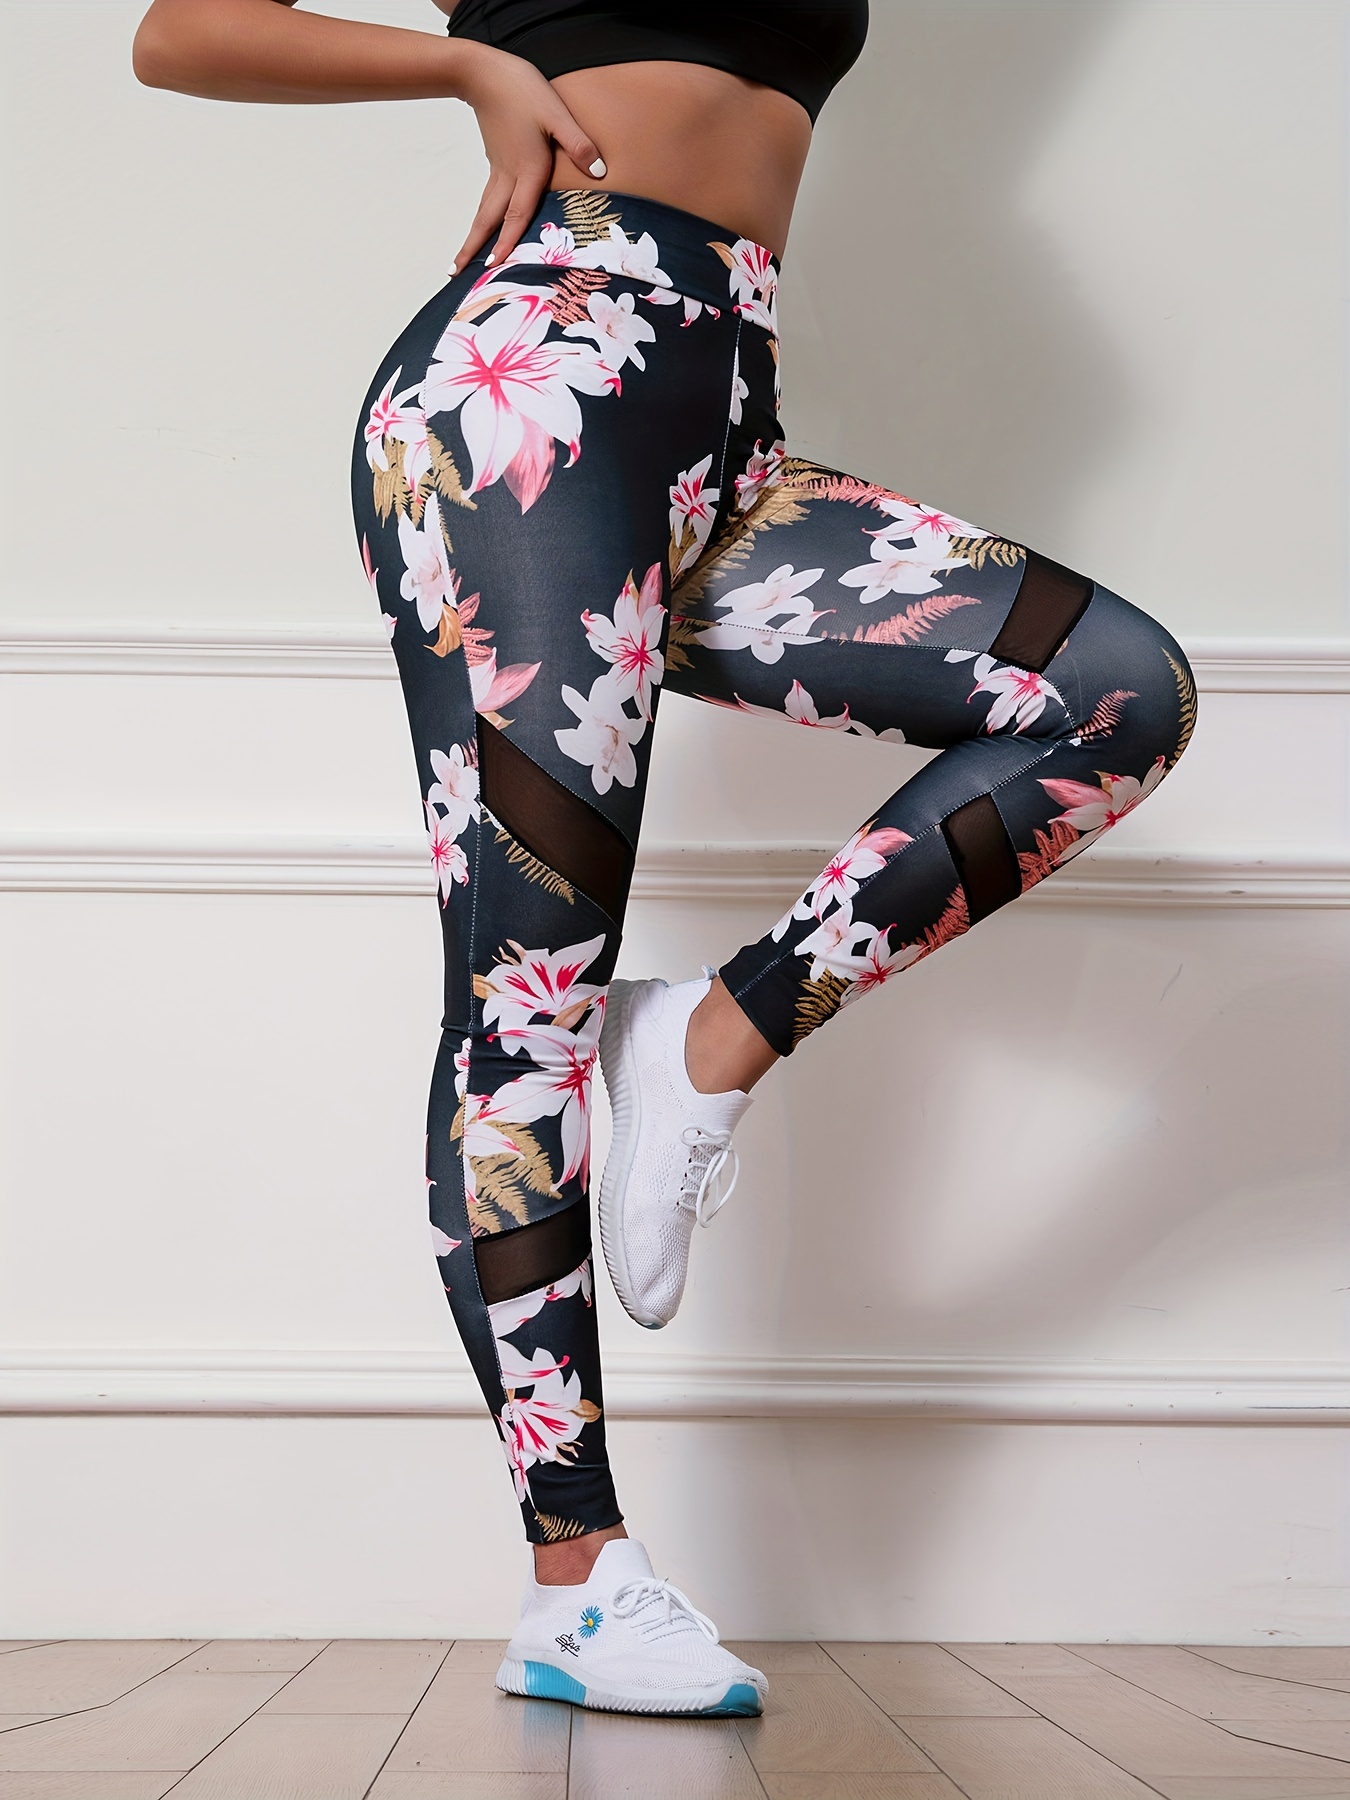 Butterfly Leggings, Flower Printed Pant, Cute Floral Legging, Stretchy  Leggings, Activewear for Women, Running Yoga Pant, Exercise Clothing 